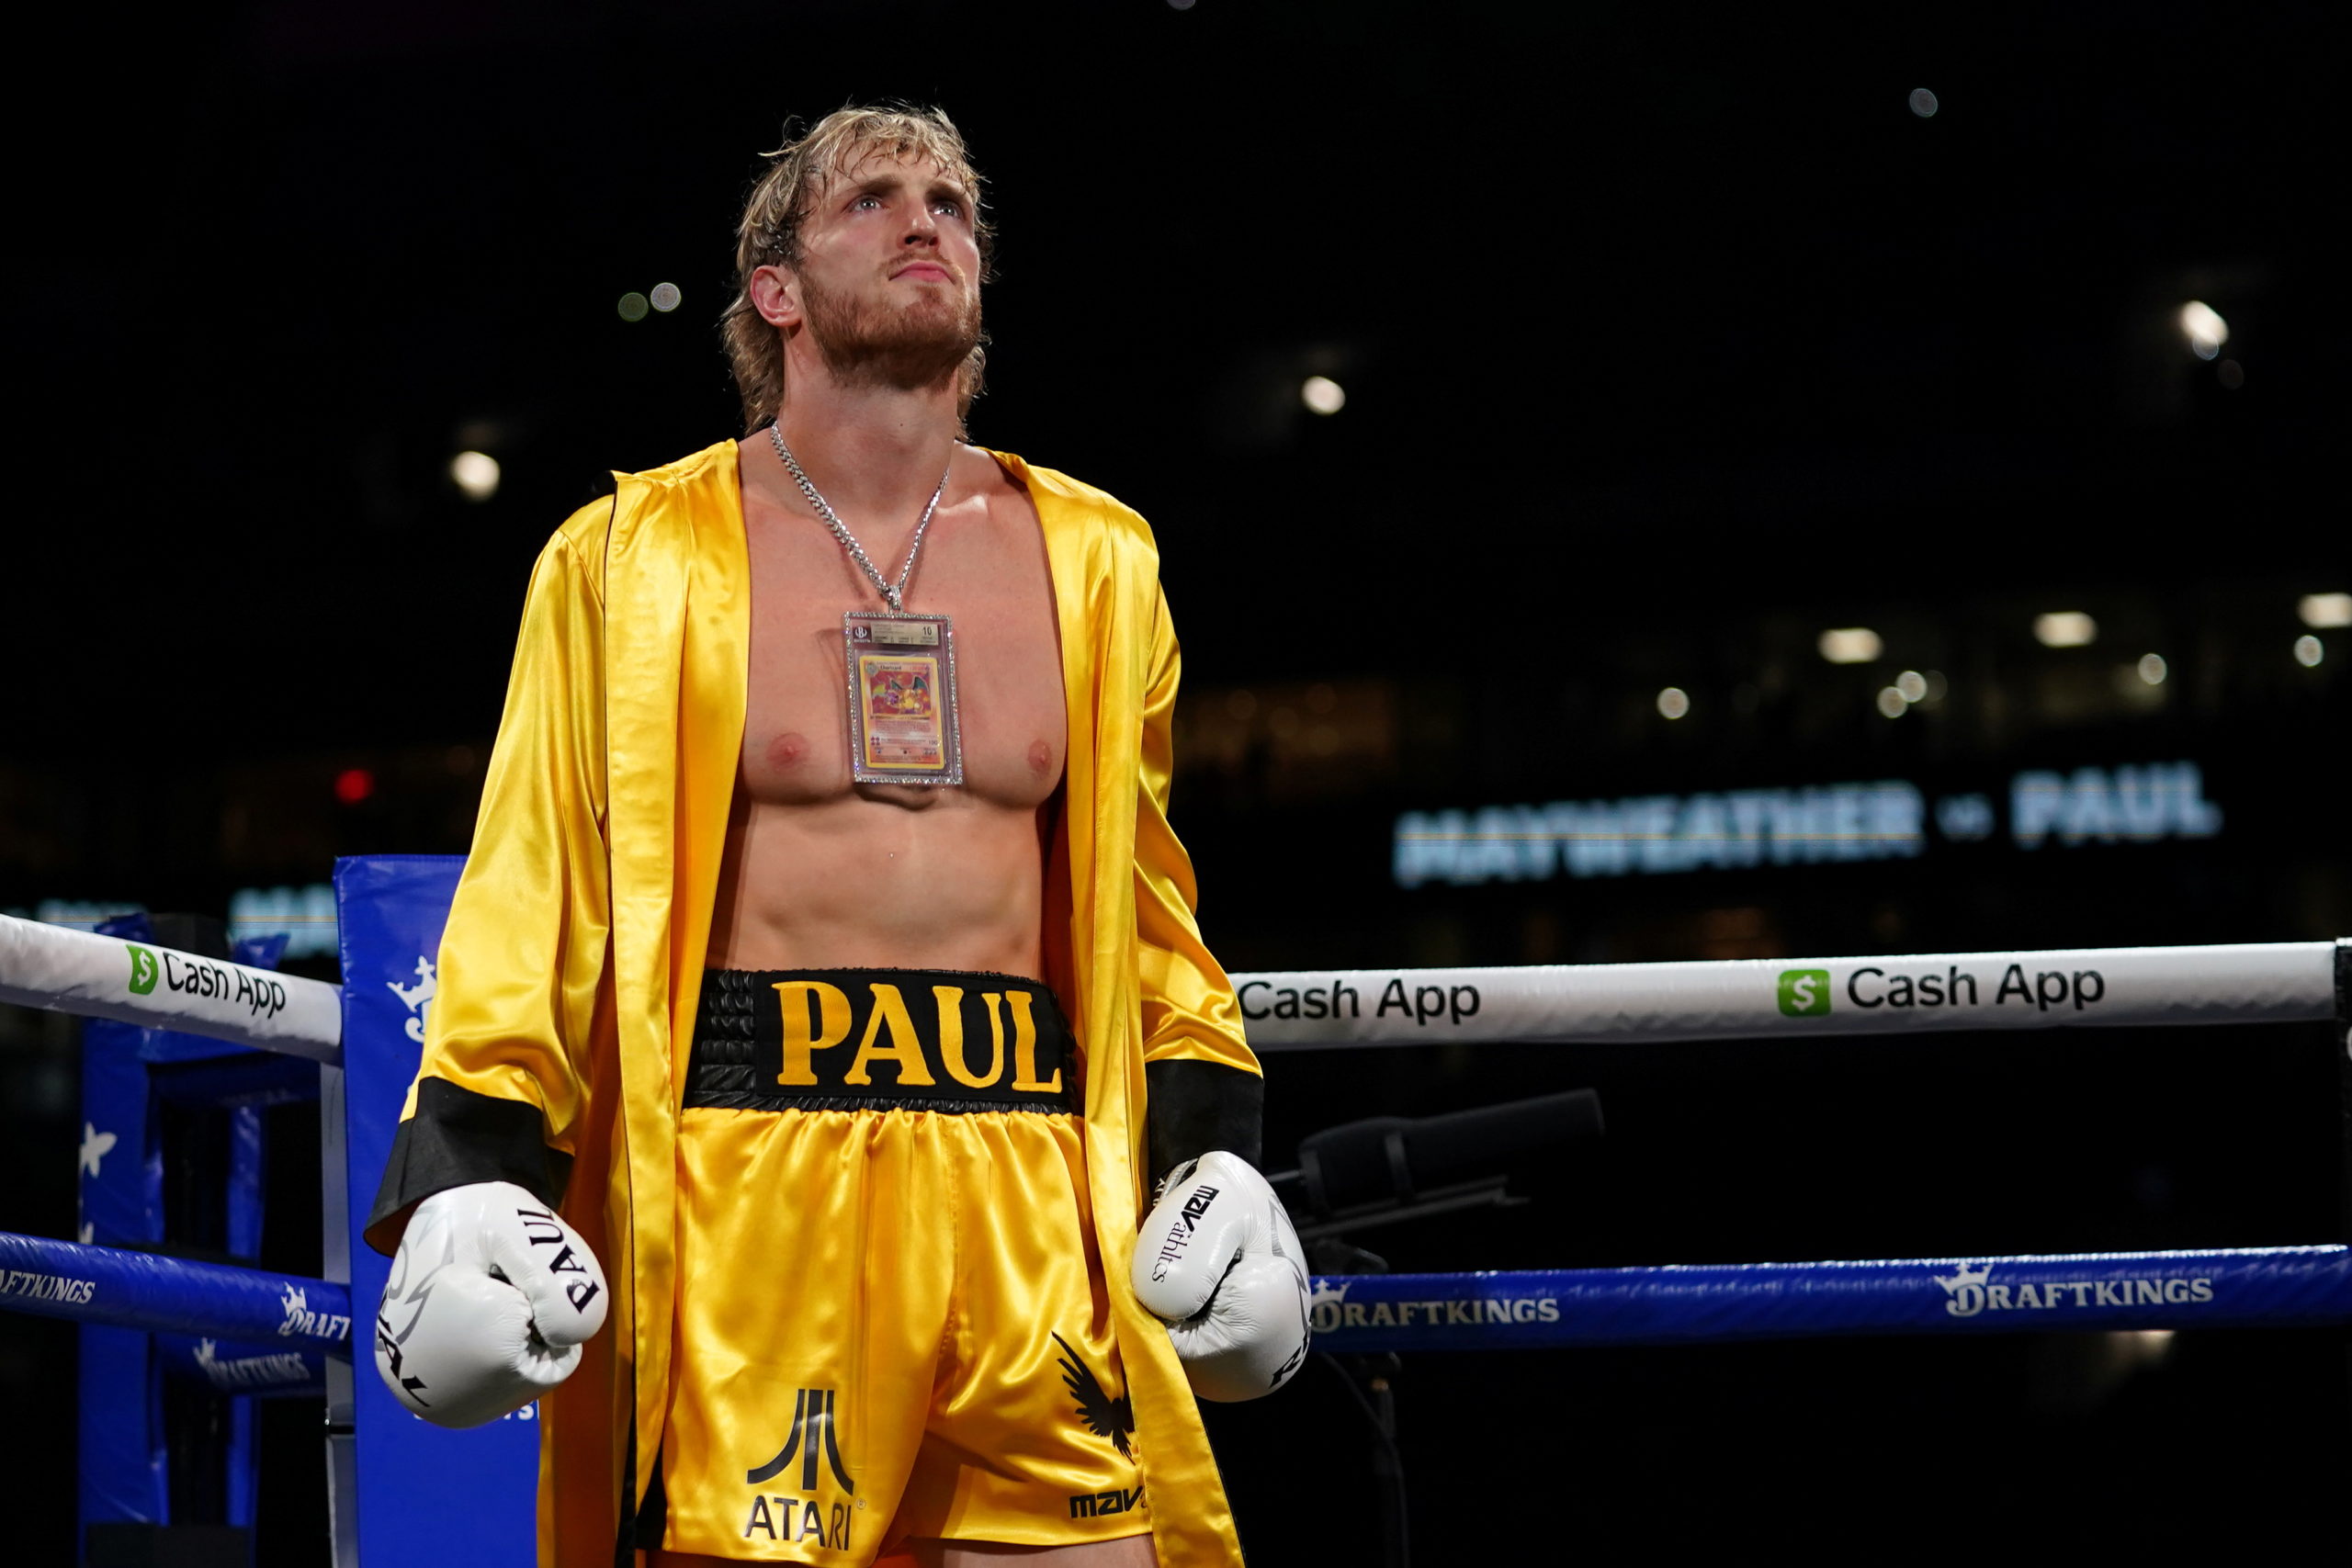 Logan Paul (Yellow Trunks) stands in the ring prior to an exhibition boxing match against Floyd Mayweather Jr. 